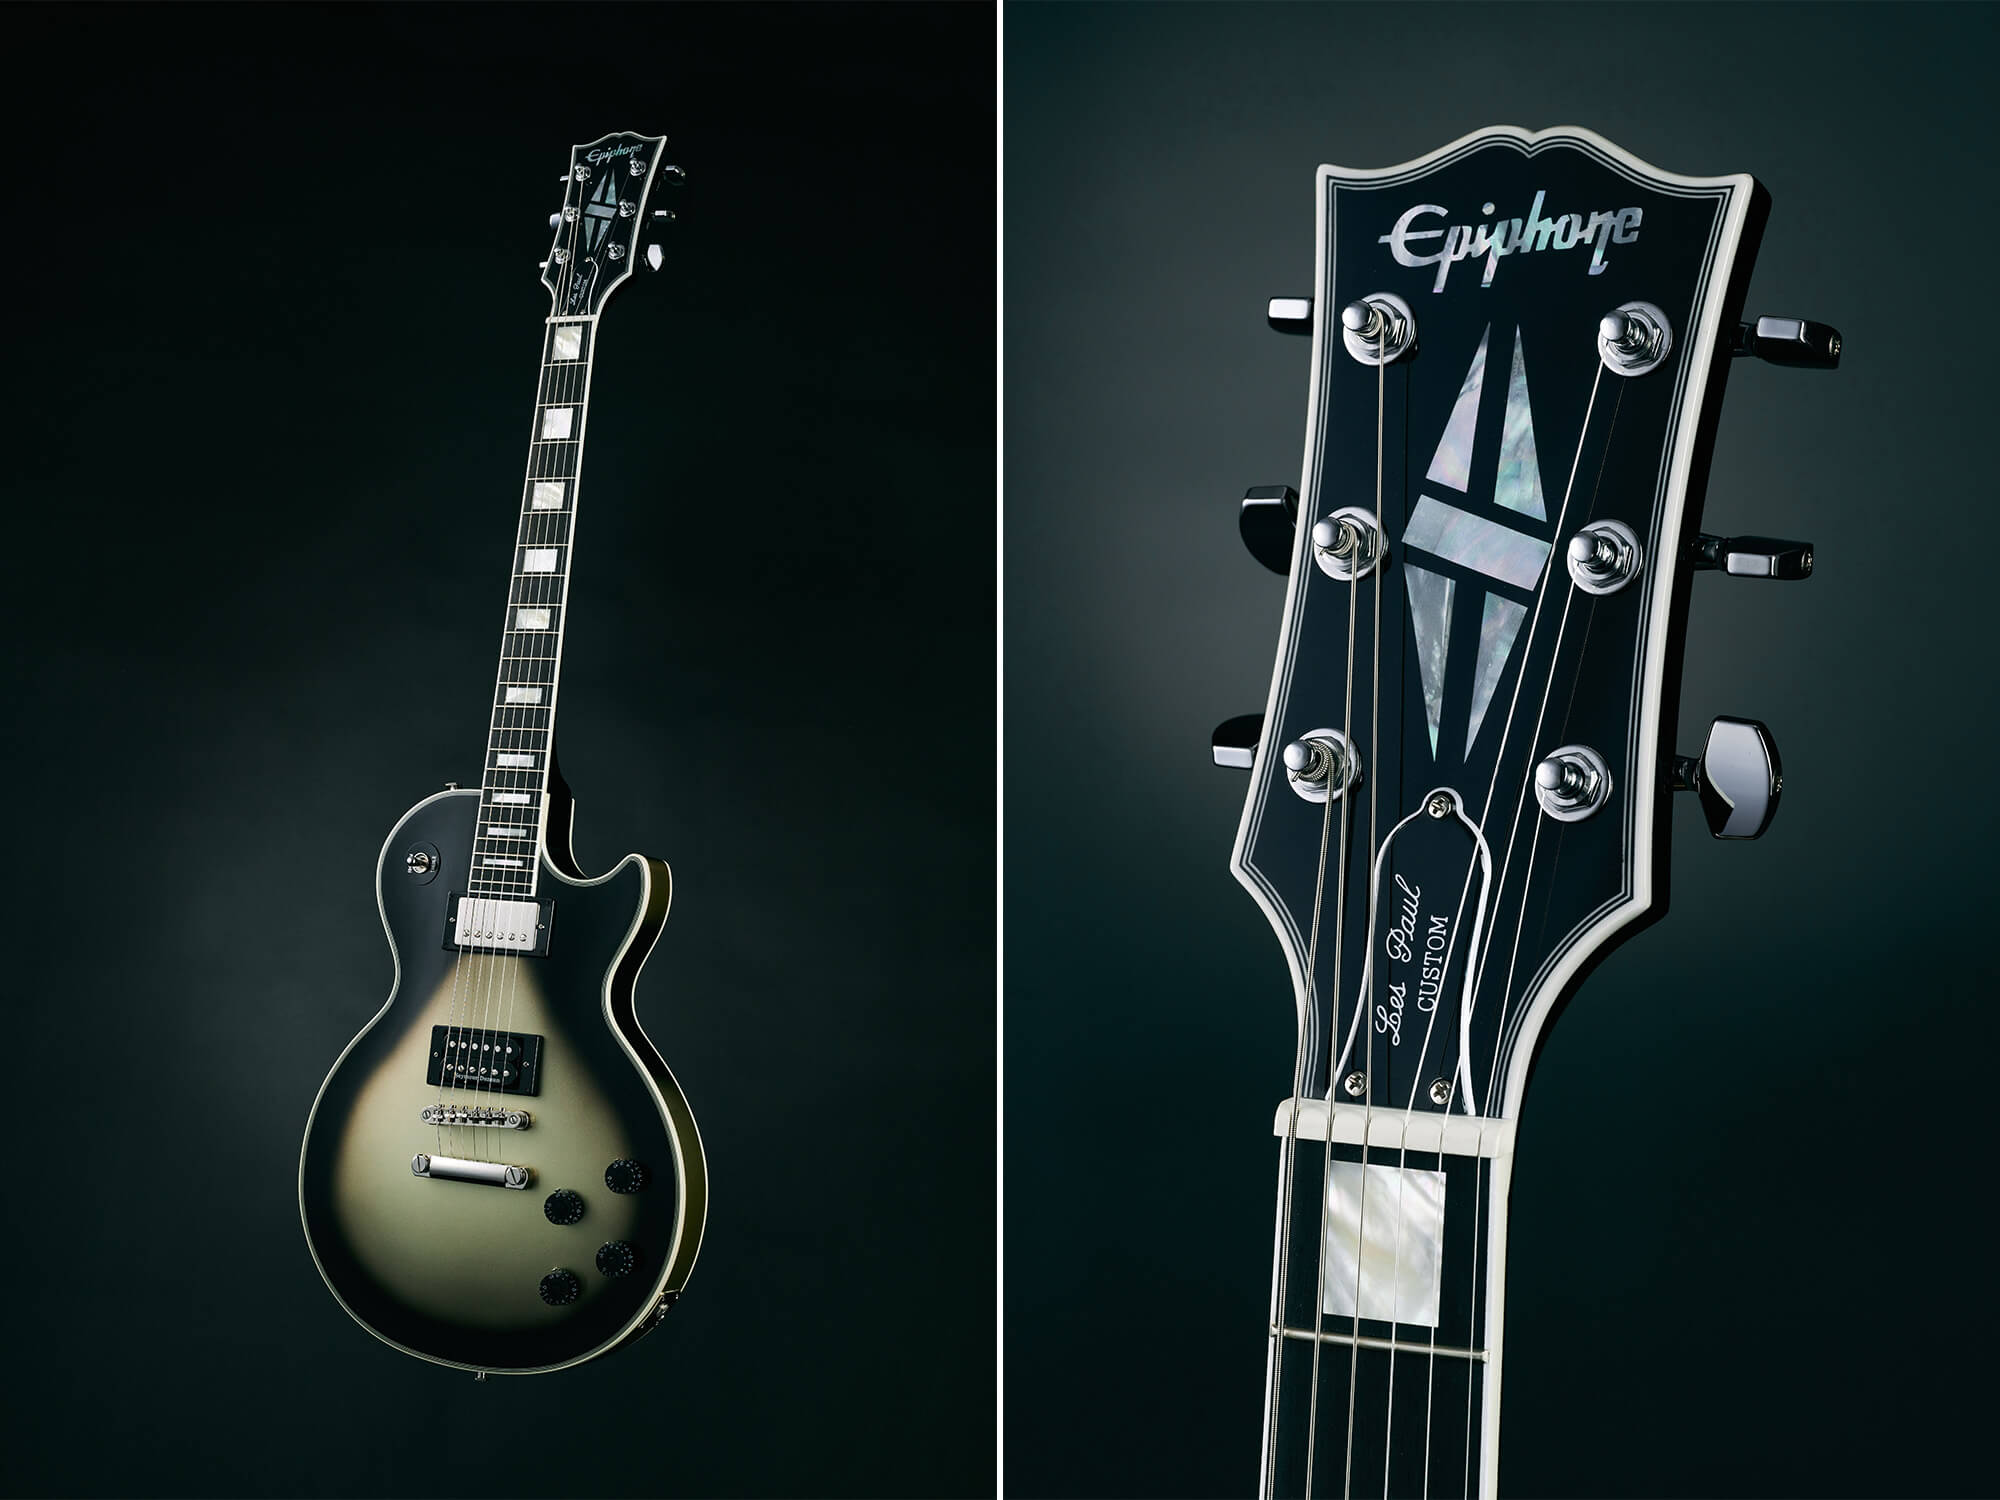 Two photos of the Epiphone Adam Jones Les Paul. One shows the guitar at full, the other is a close up of the Gibson-style open book headstock. The guitar is black at the edges fading into silver.